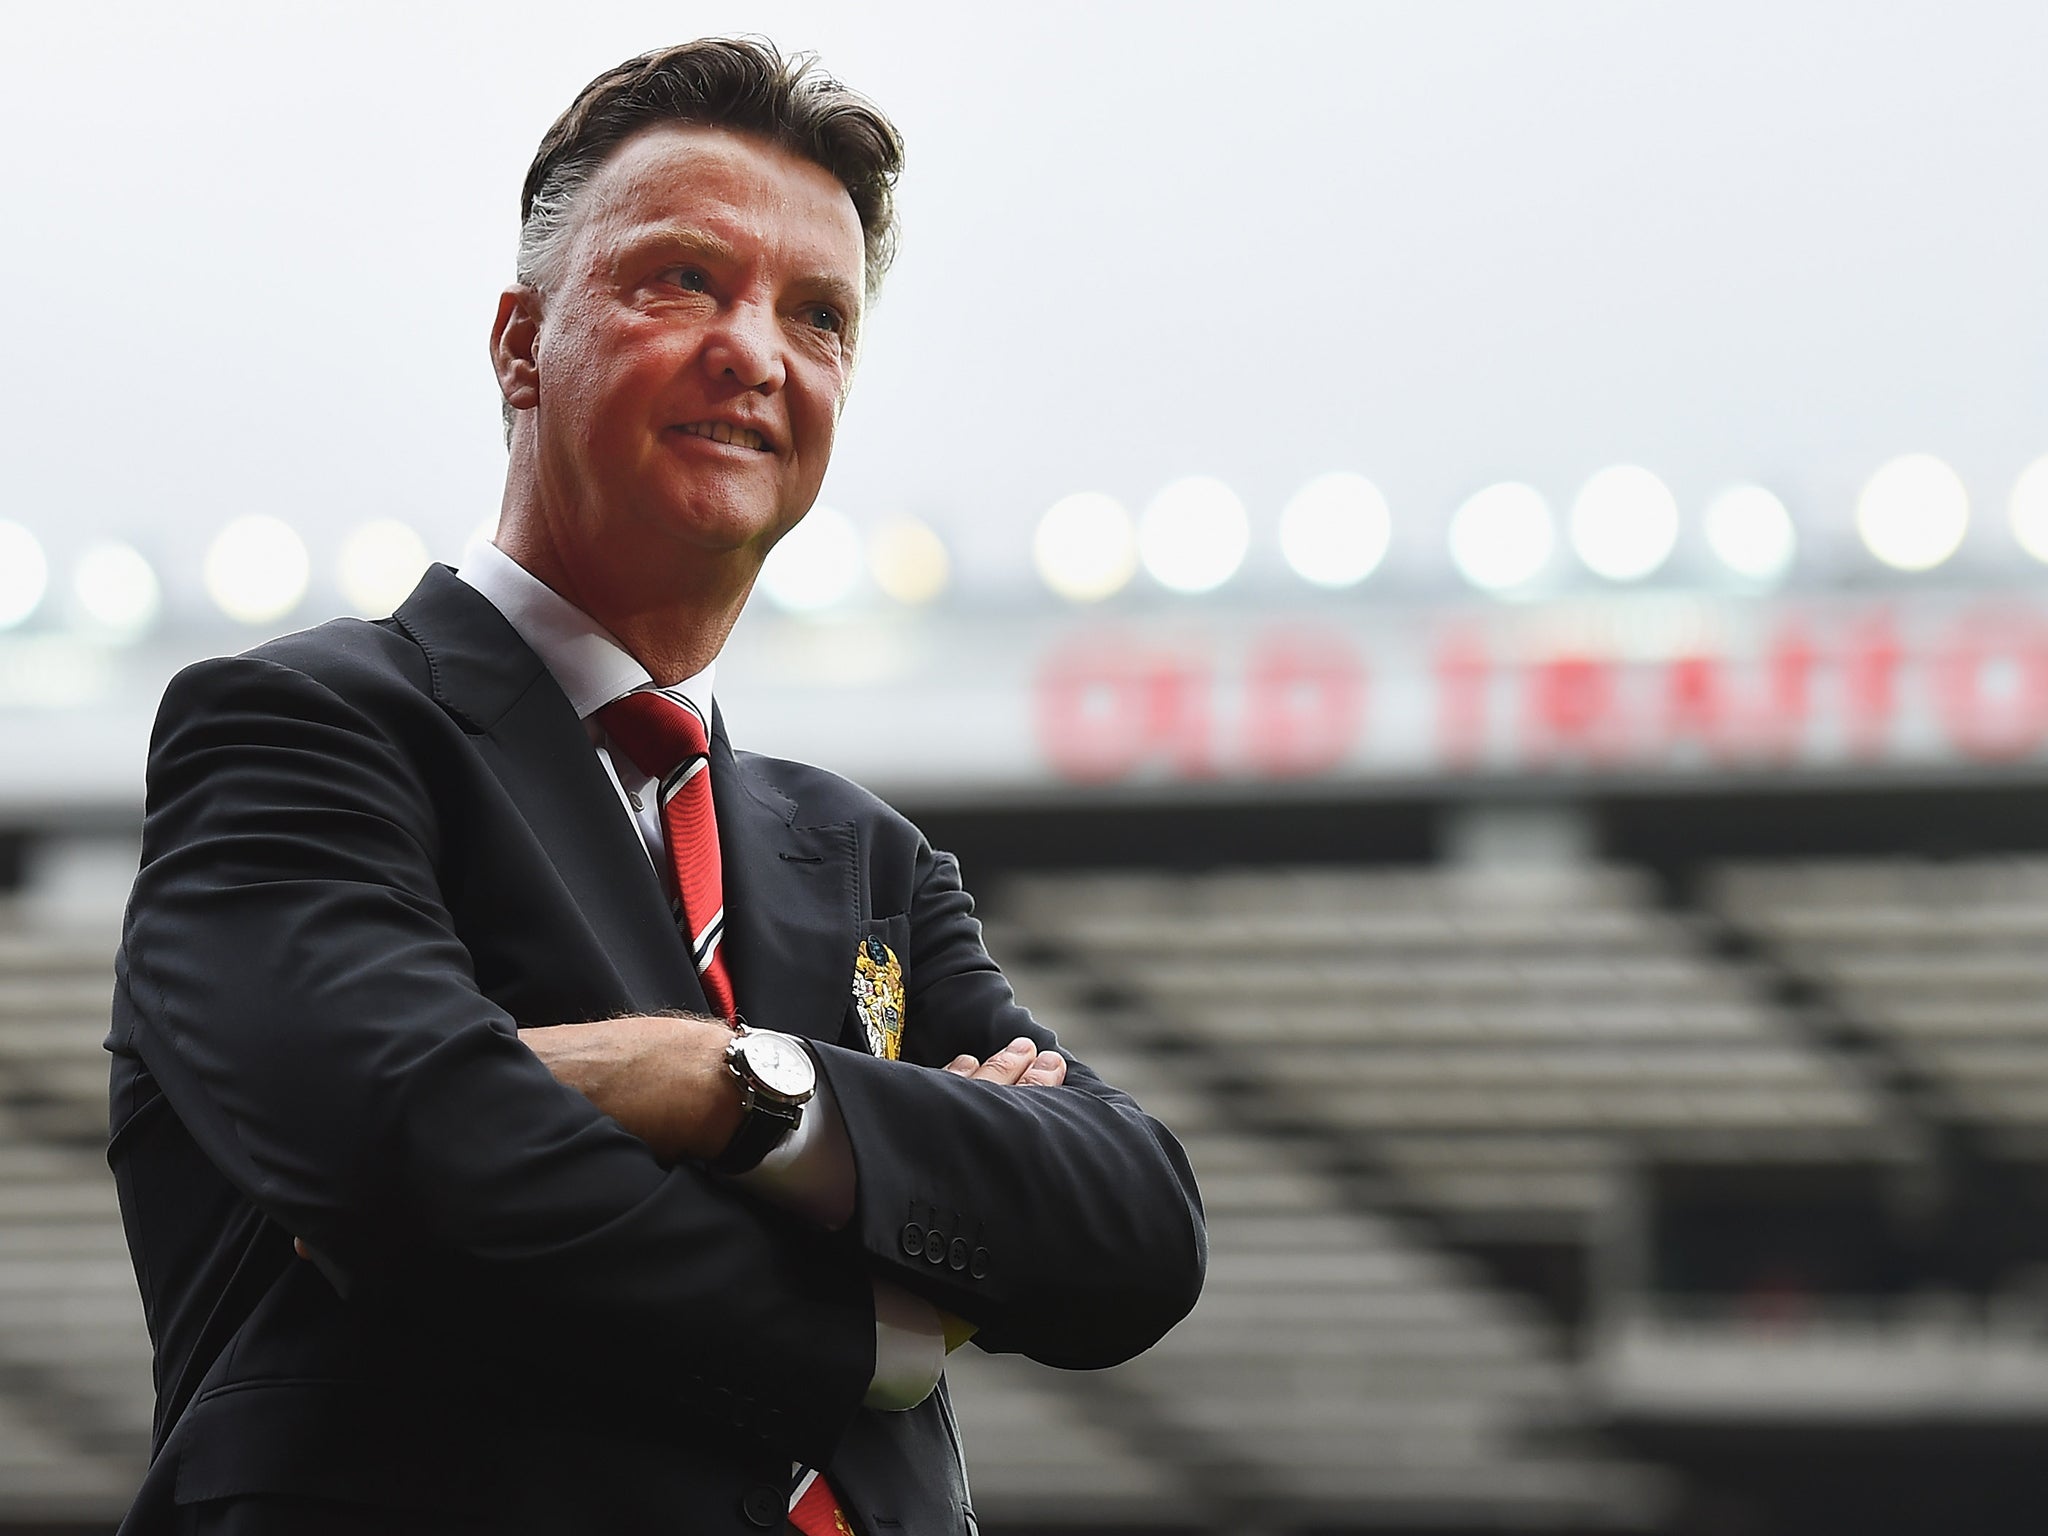 Van Gaal's United have recovered from their worst start to a season after 10 games since 1986-87 (Getty)